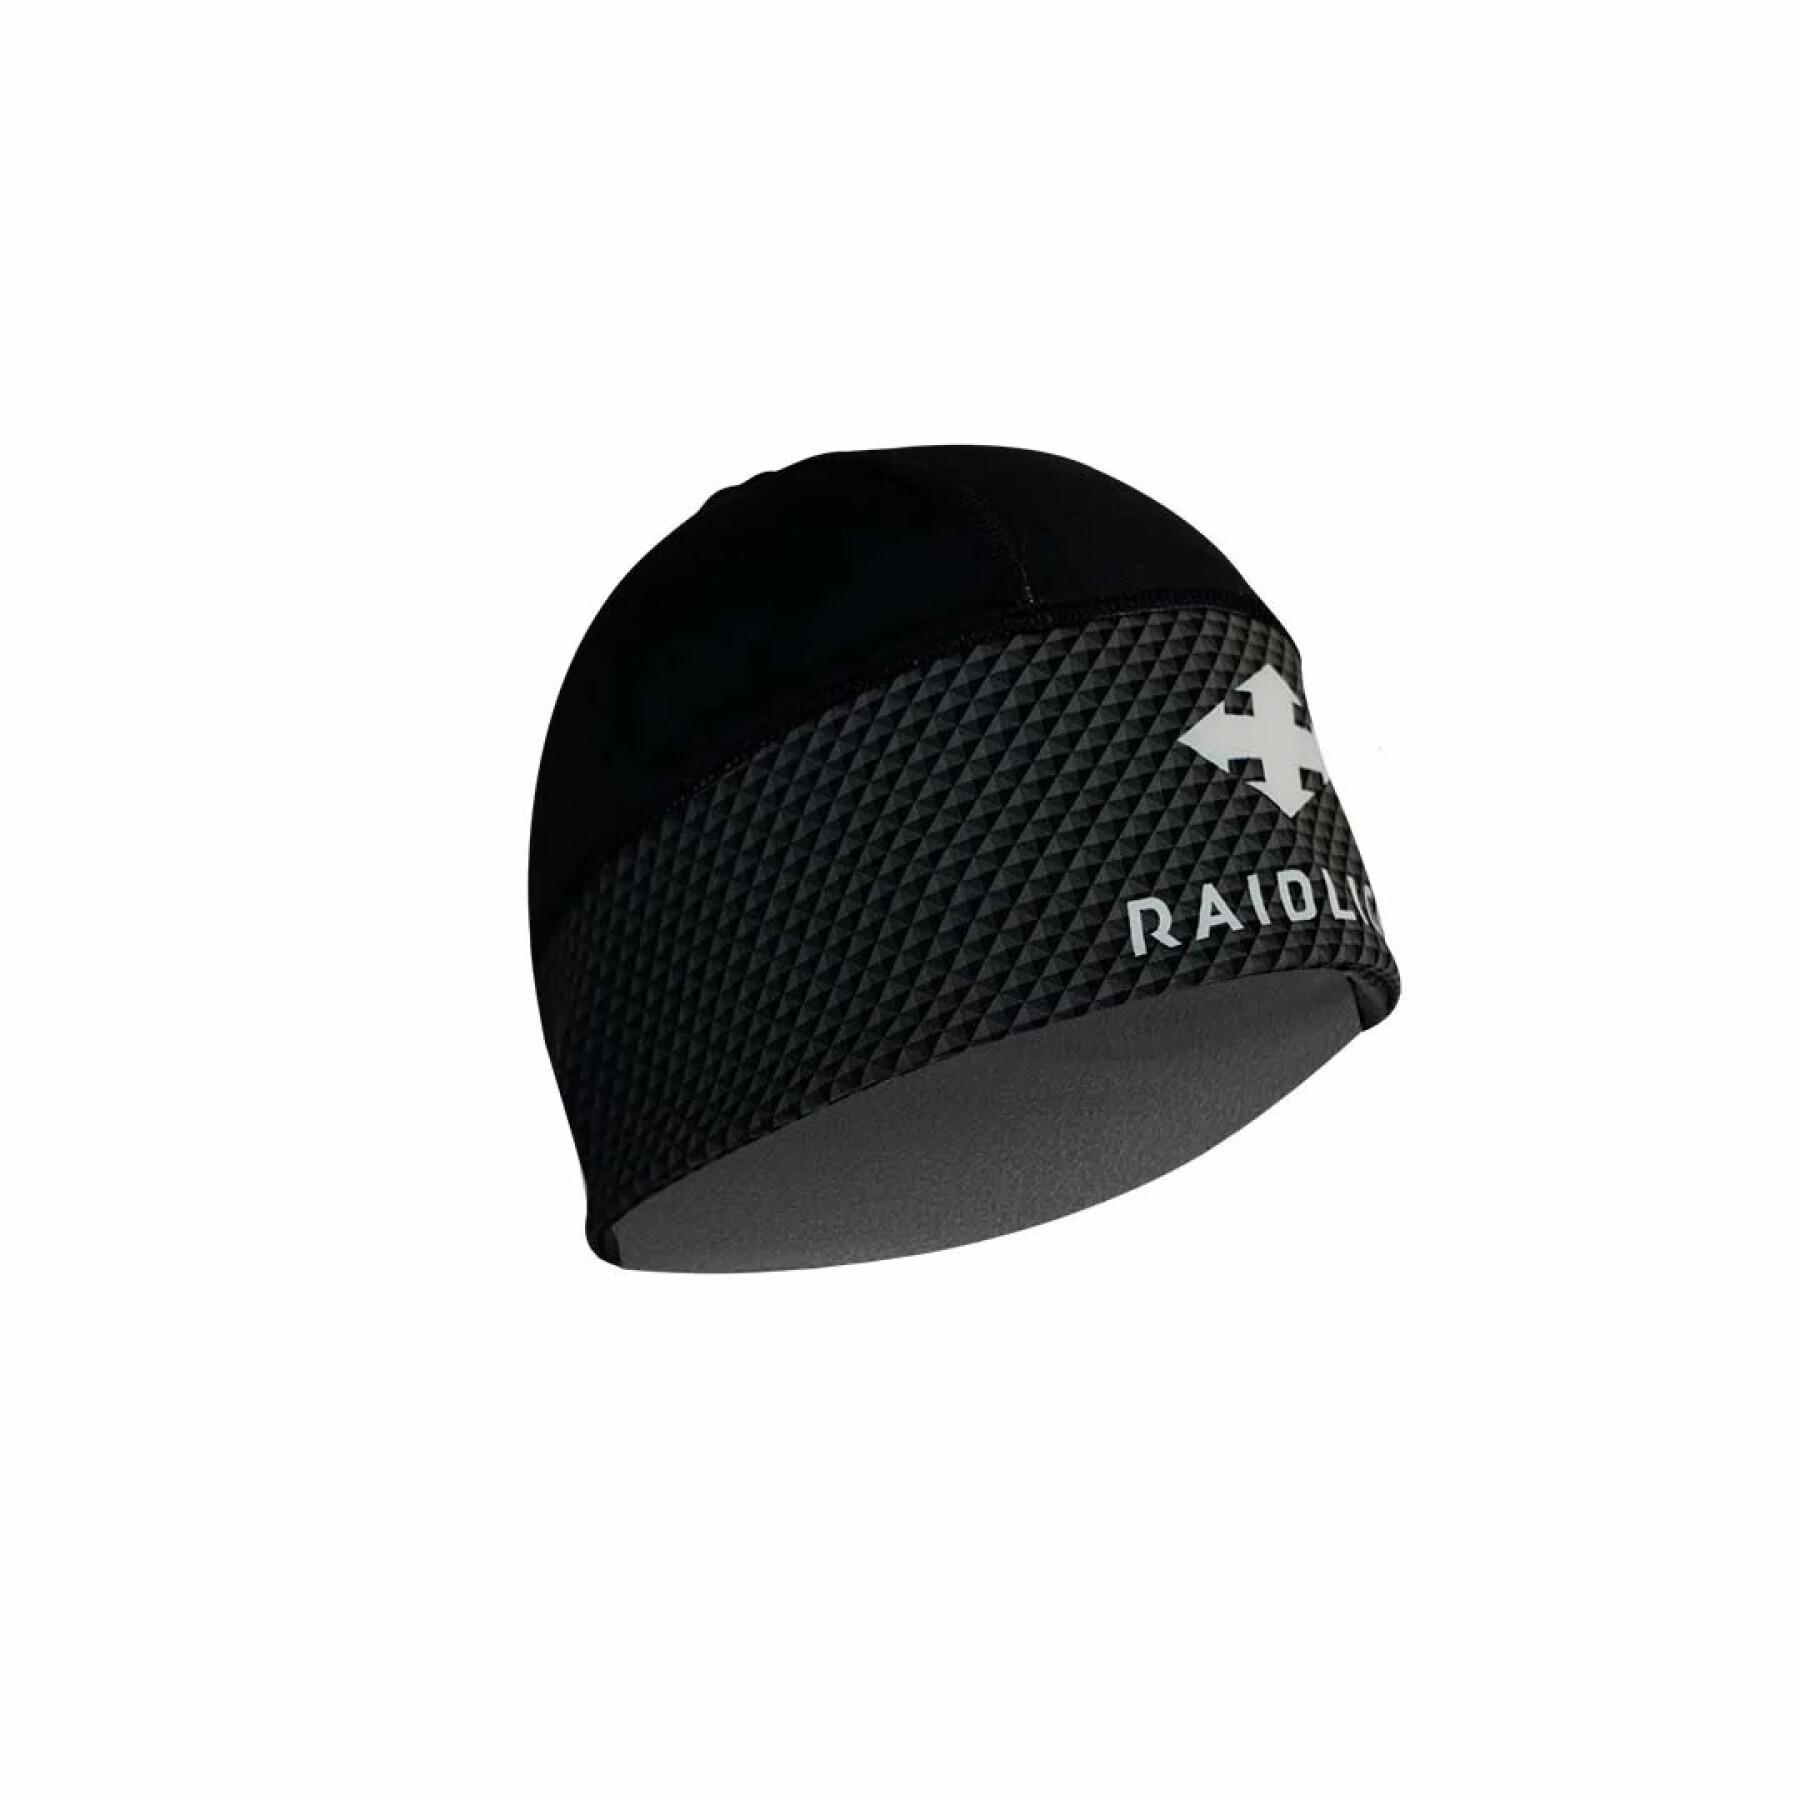 Winter hat RaidLight Made in France